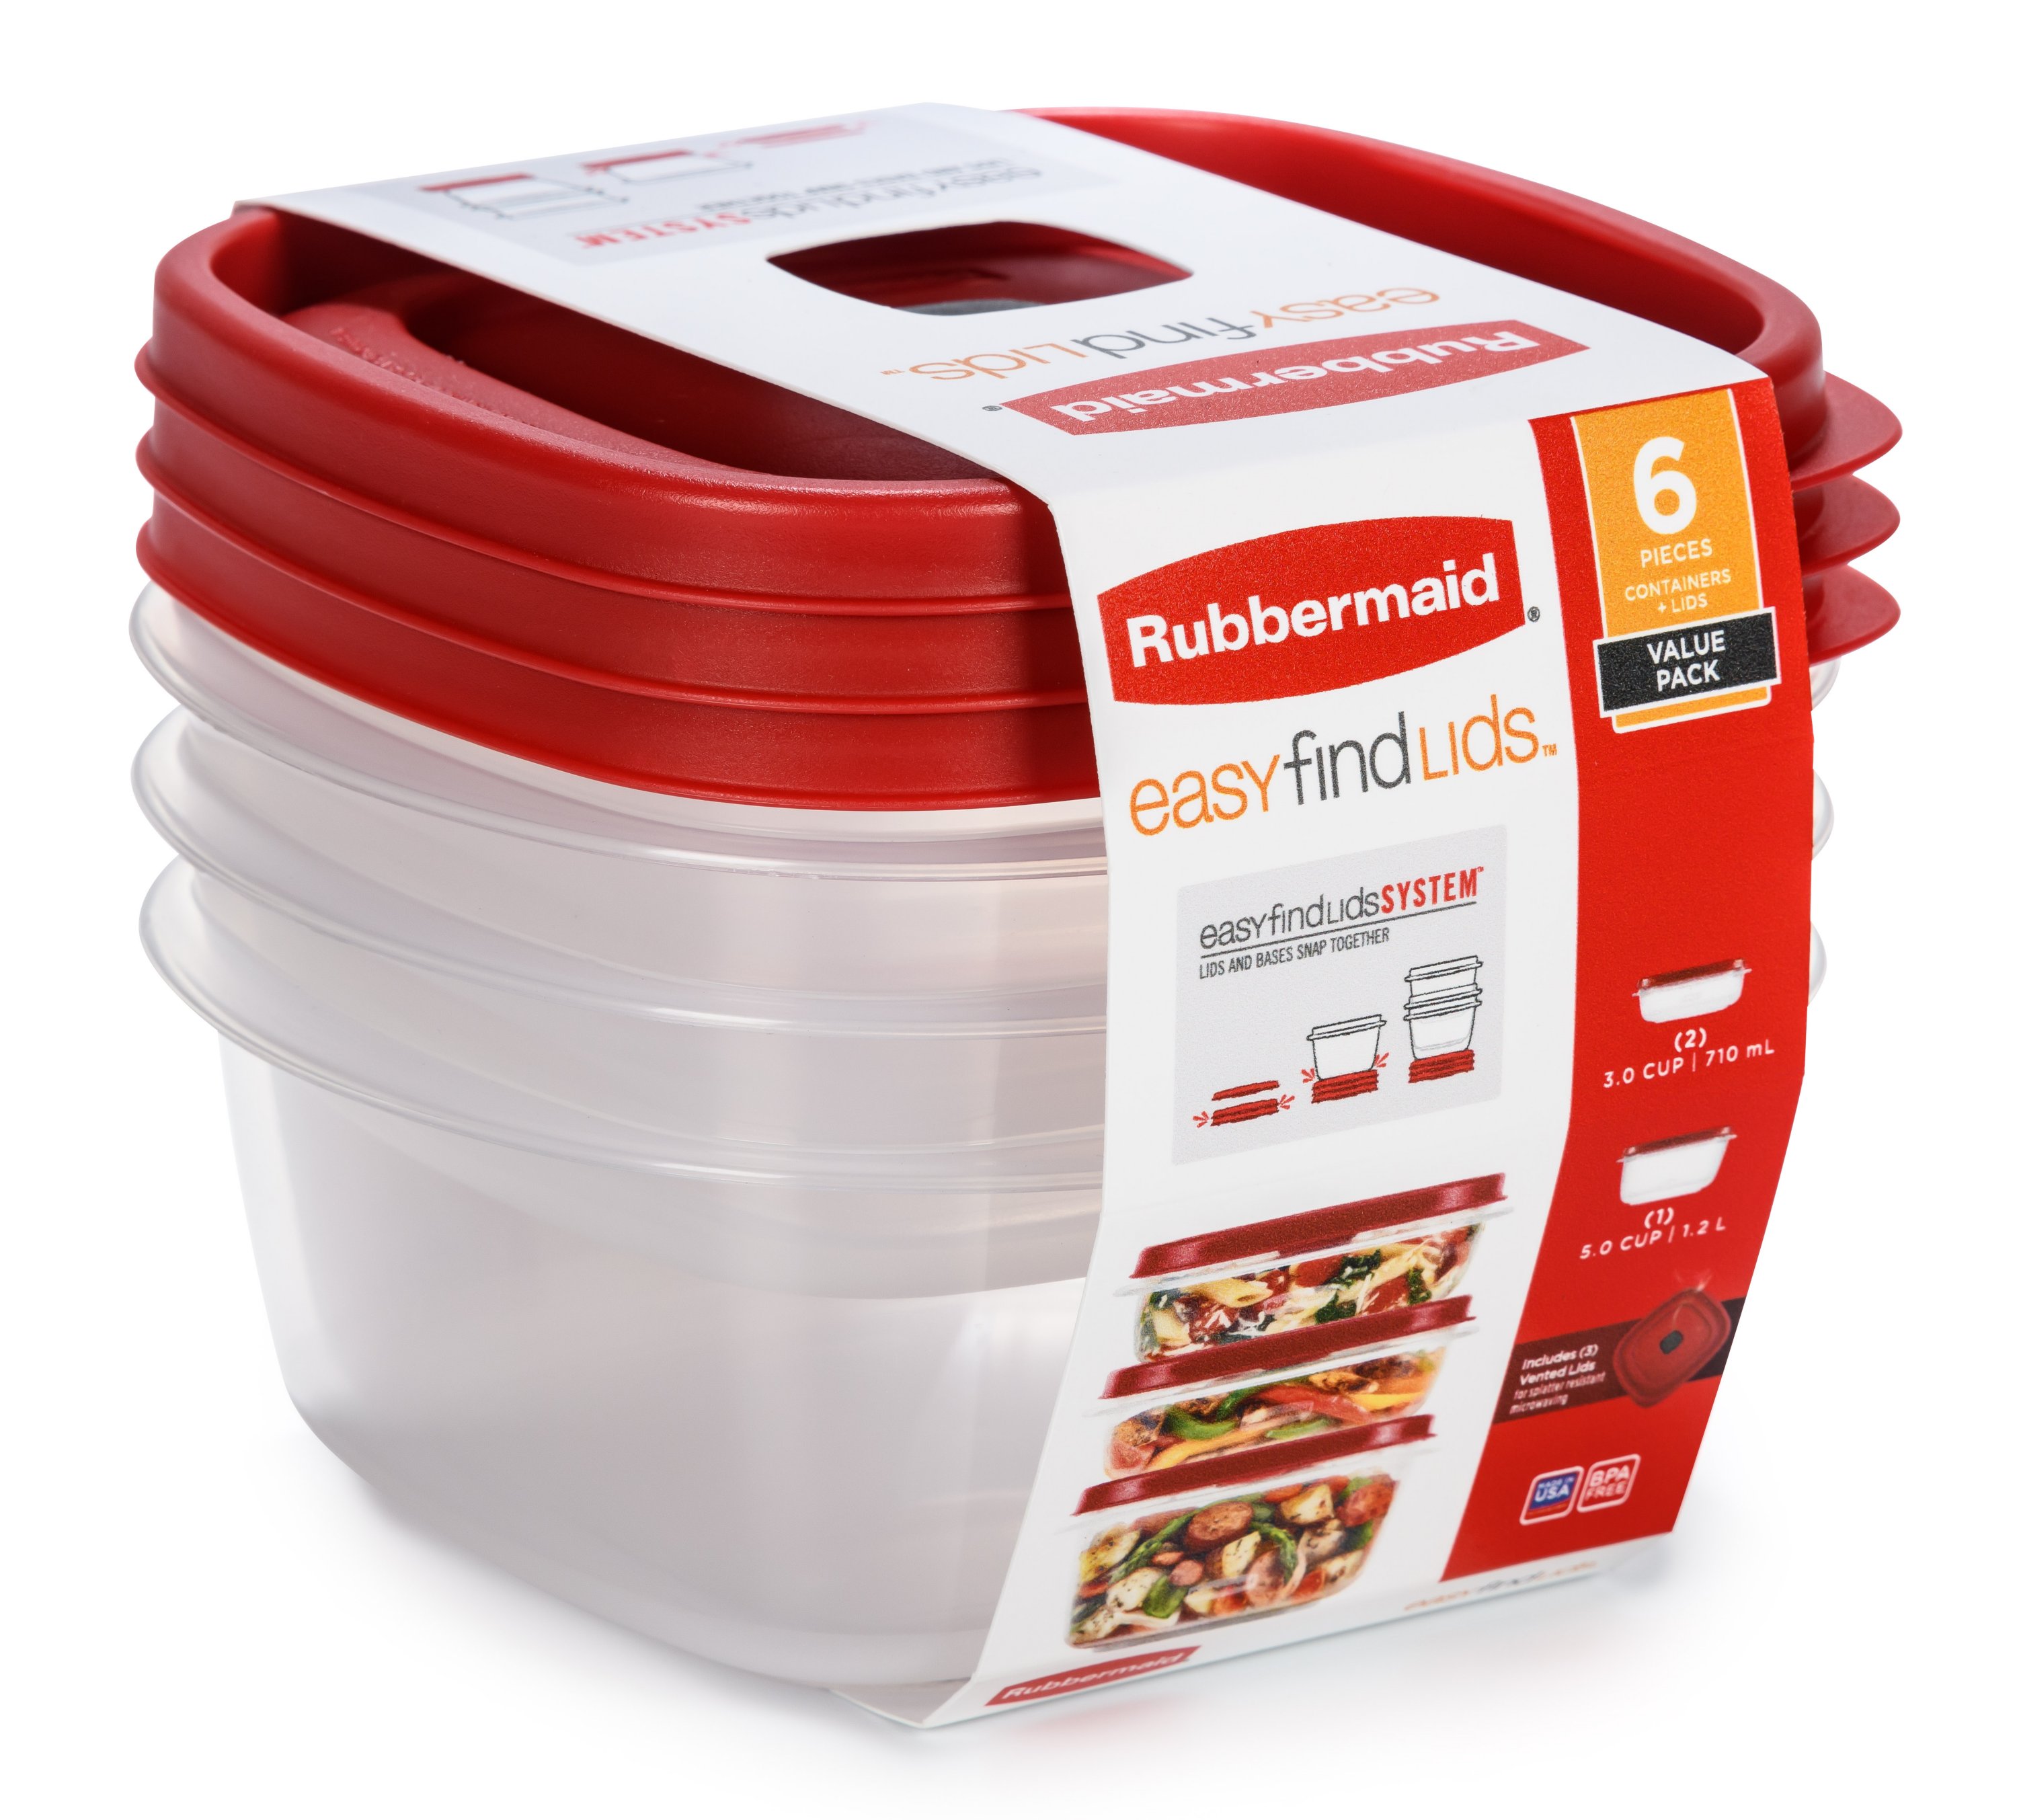 Rubbermaid Easy Find Lids Modular Canisters - 3 pack, 6 piece set